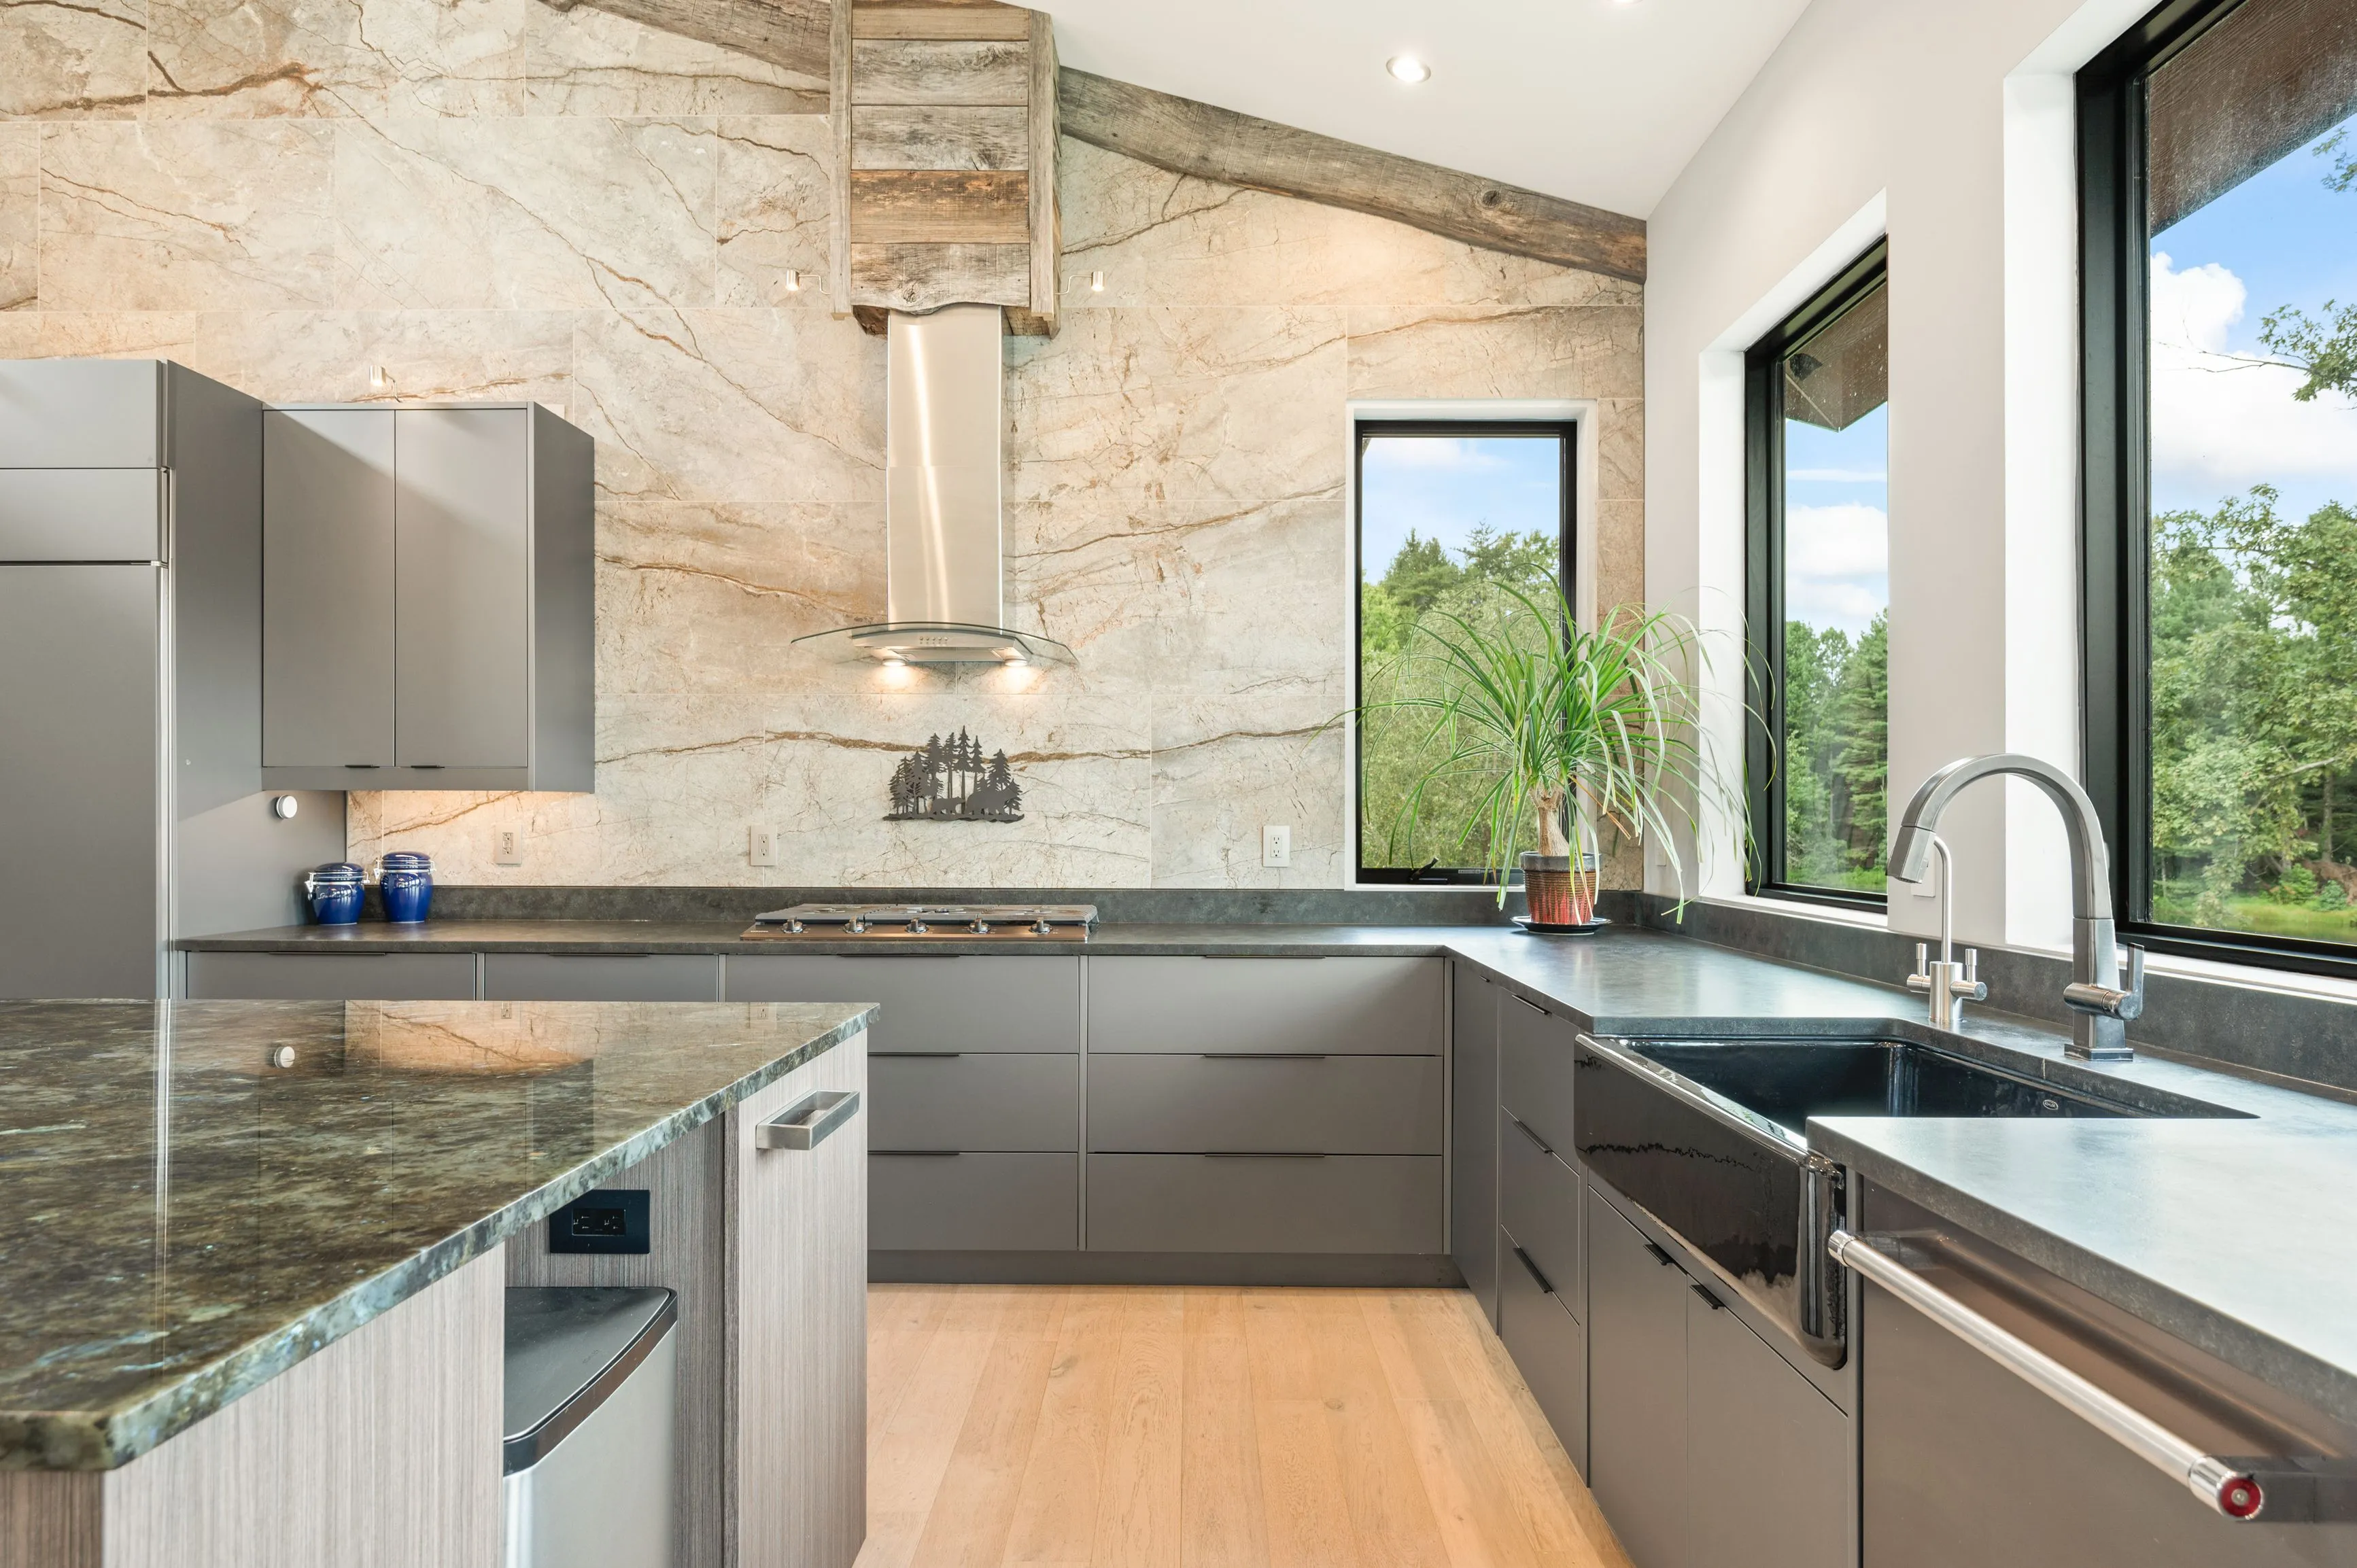 Modern kitchen interior with granite countertops, stainless steel appliances, and large windows overlooking greenery.